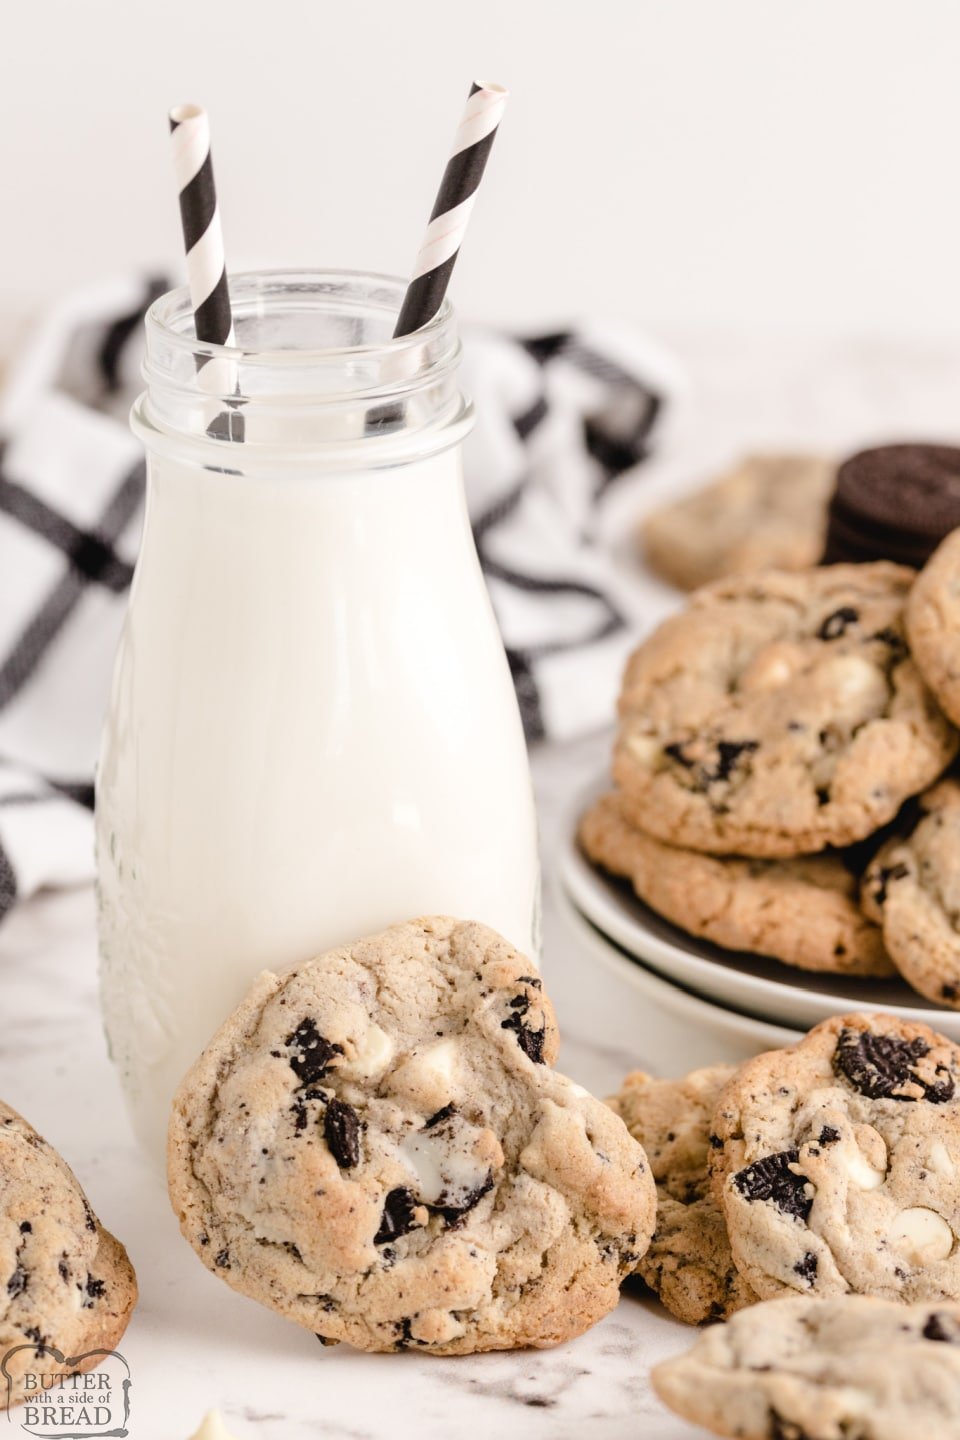 Cookies & Cream Cookies are made with Oreo pudding mix, white chocolate chips and chunks of Oreo cookies. This delicious cookie recipe yields perfectly soft and chewy cookies every time!